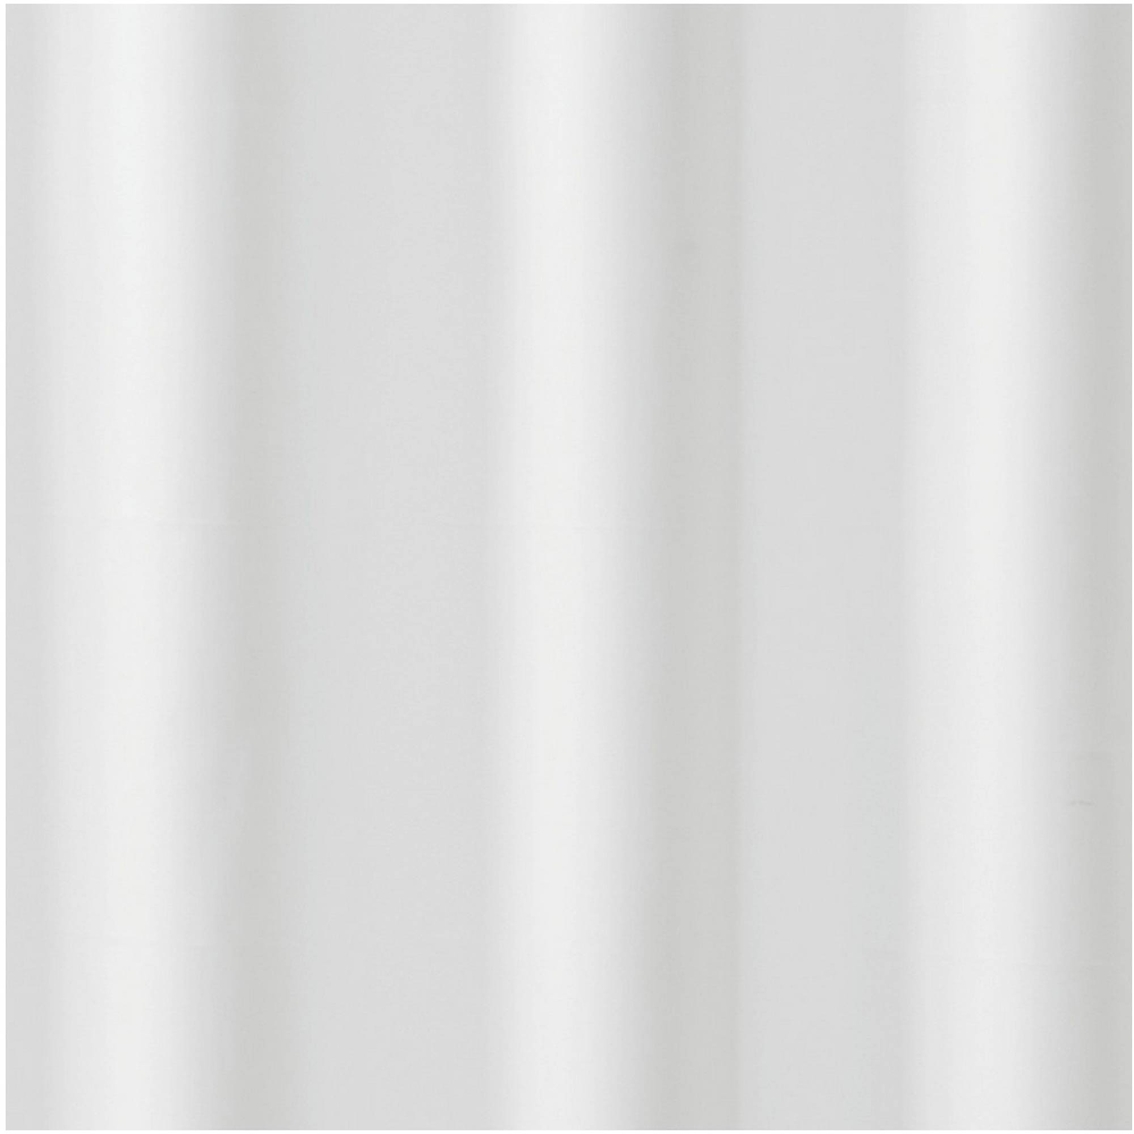 Truly Calm Grommeted 70 in. x 72 in. Shower Curtain - Image 2 of 2